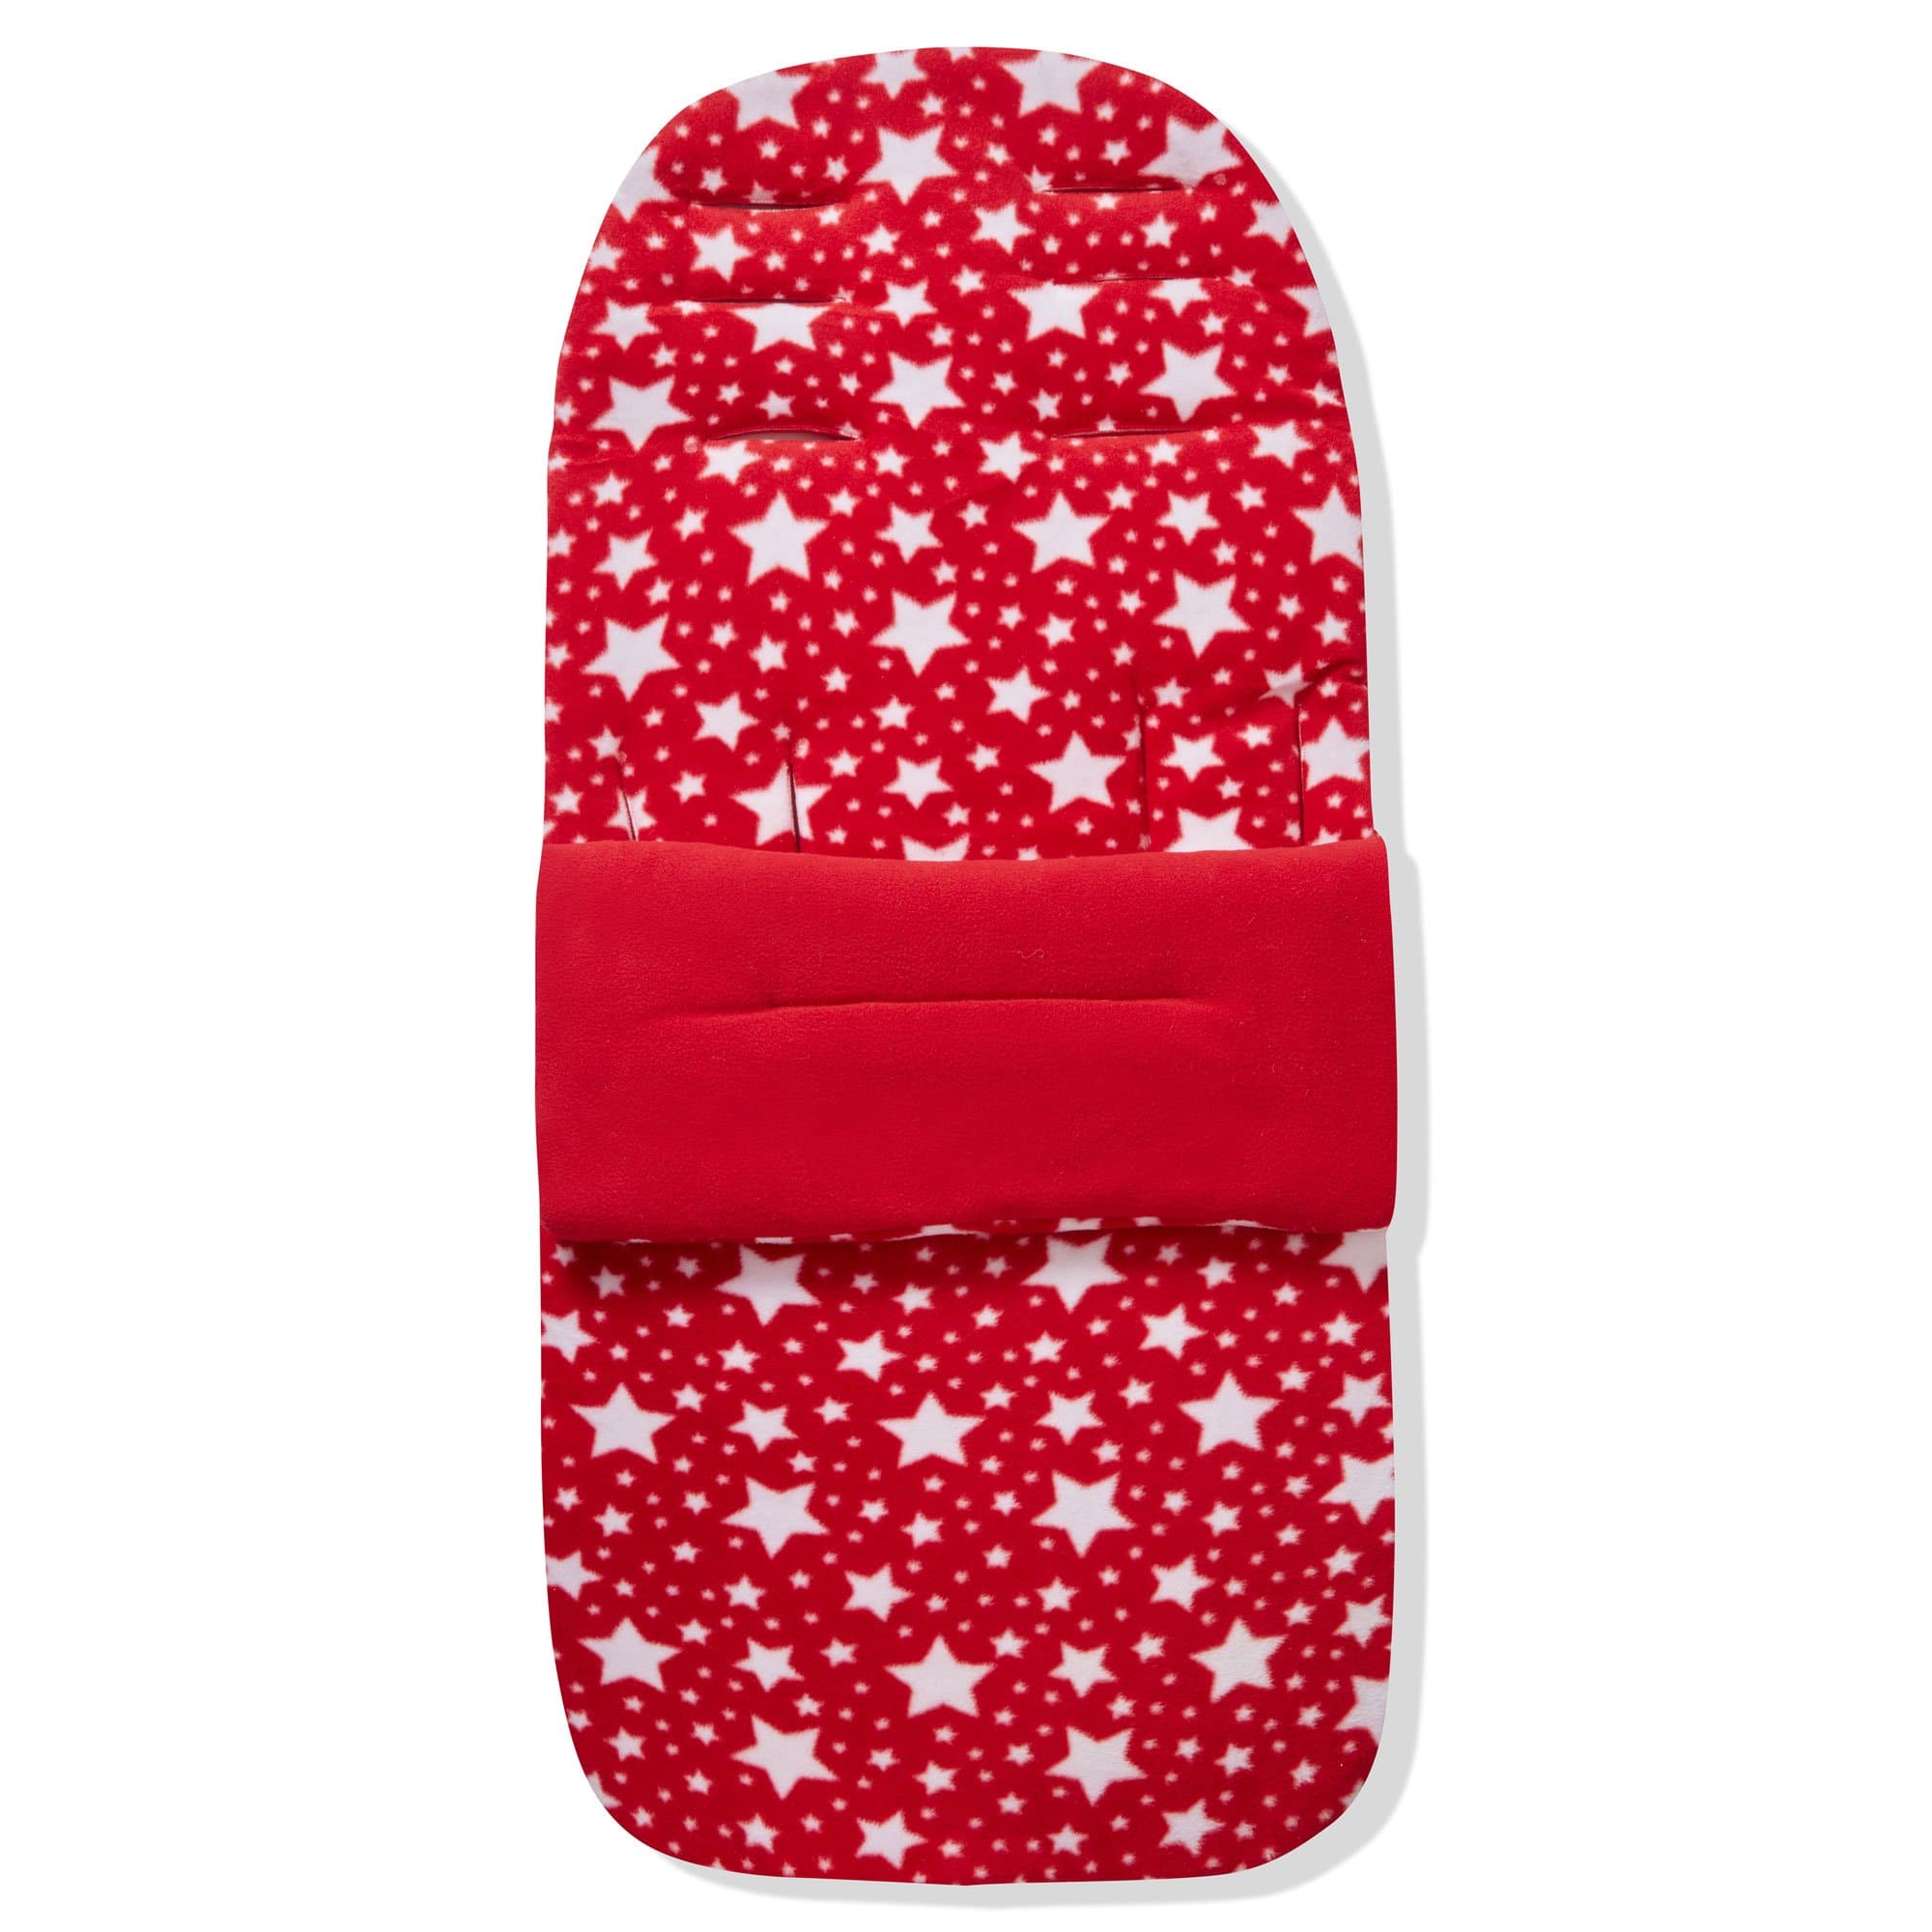 Fleece Footmuff / Cosy Toes Compatible with Zeta - For Your Little One